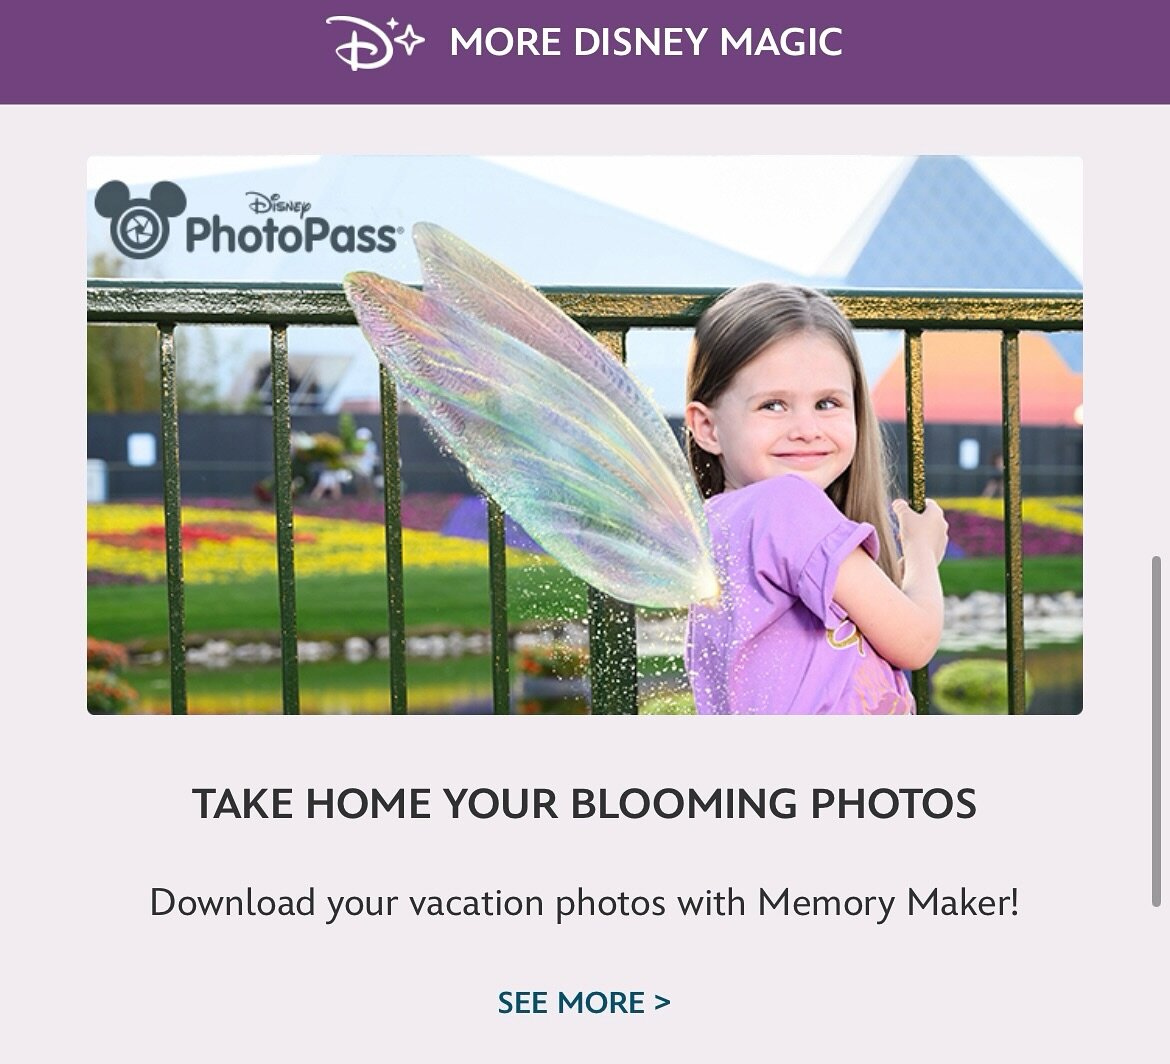 Happy to first day of Spring! Loved seeing this photo from a shoot we styled for @disneyphotopass in the @disneyd23 email 🌸
.
.
#spring #firstdayofspring #springfashion #outfit #outfitideas #disneyoutfit #disneystyle #kidsfashion #disneyworld #disne